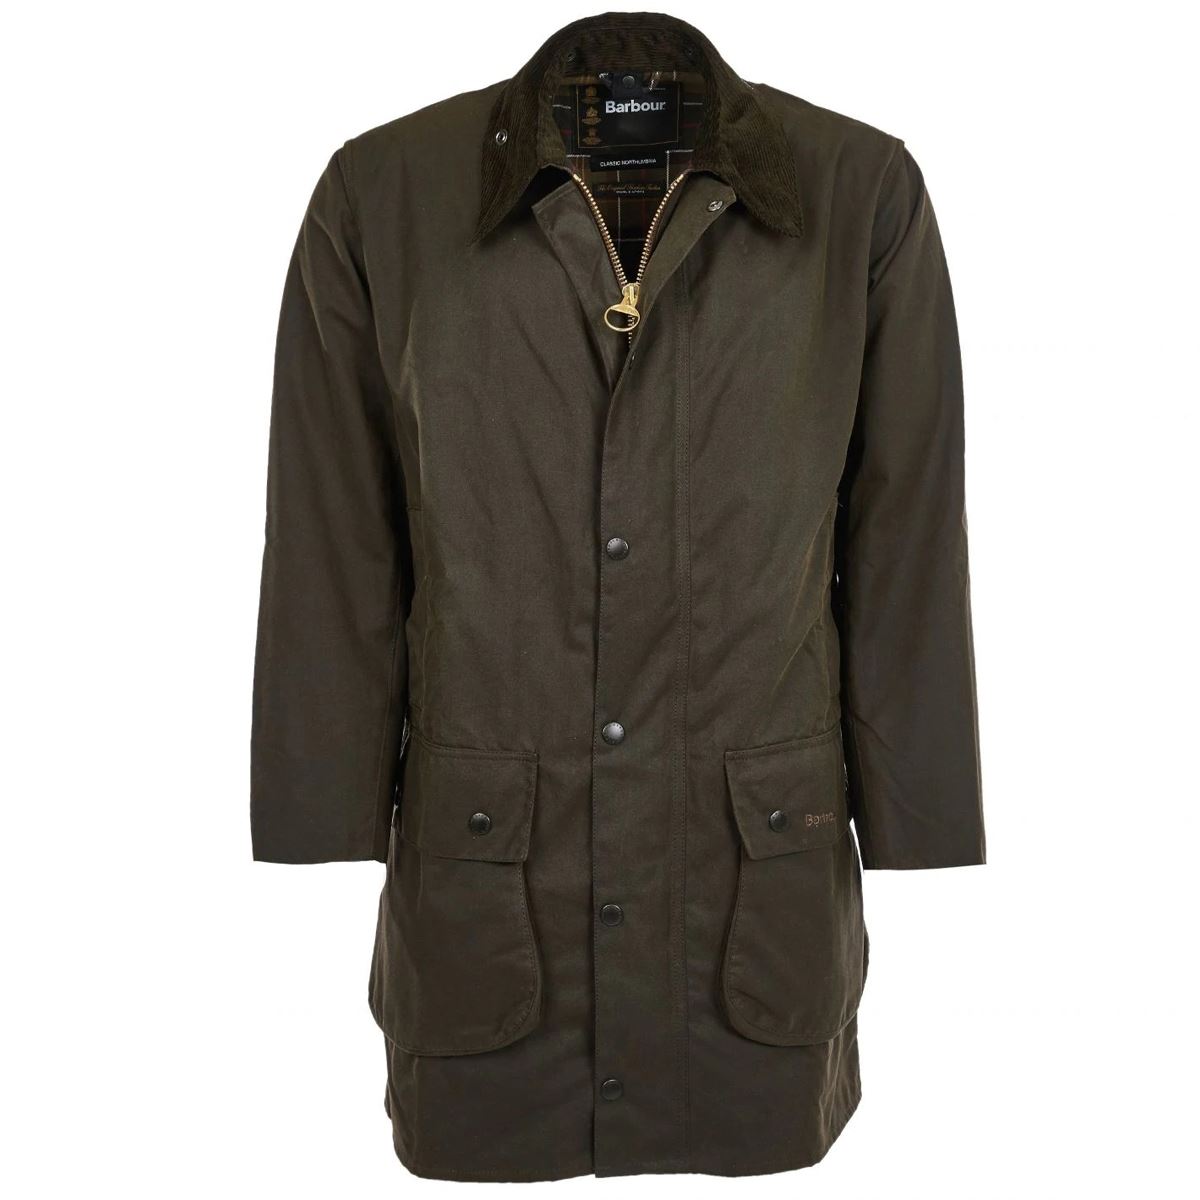 What choices does the Barbour Northumbria jacket offer?